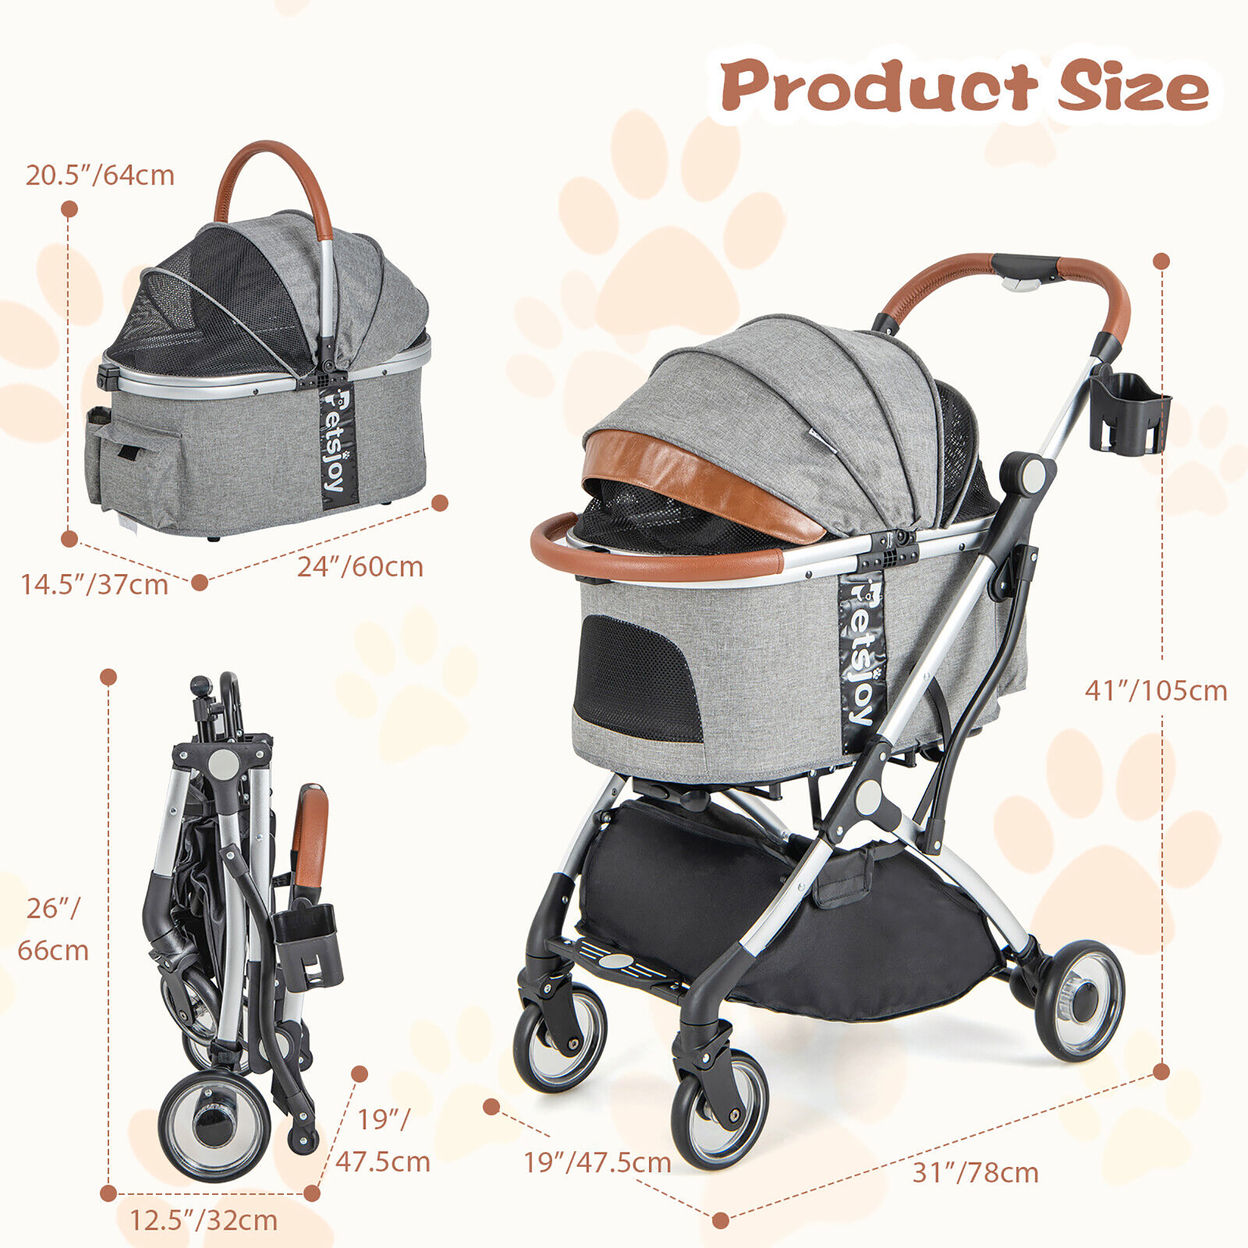 3-in-1 Pet Stroller Foldable Dog Cat Travel Carrier With Cover & Storage Basket